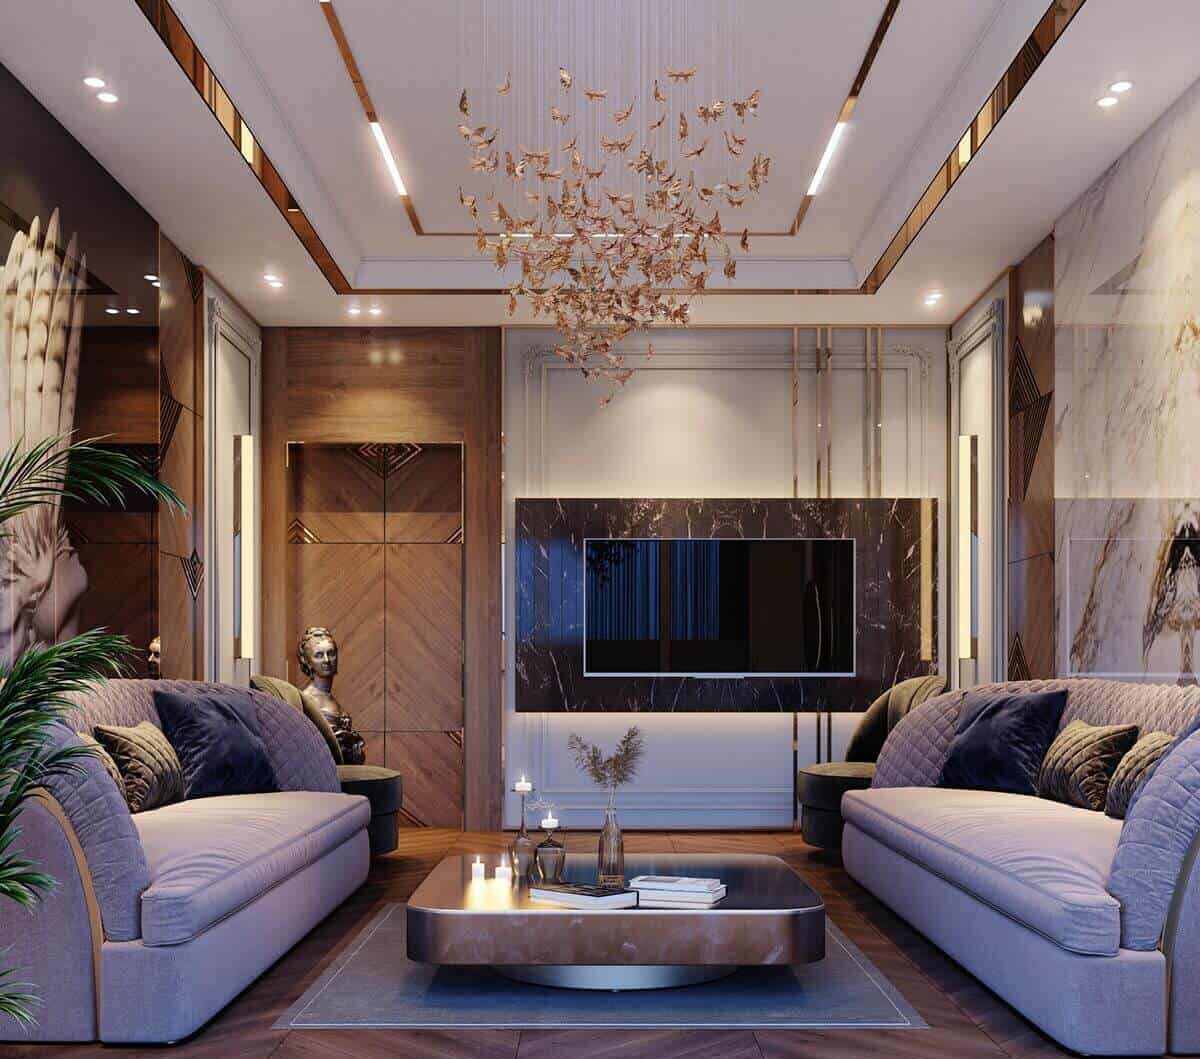 Fiber false ceiling in a living room with grey sofa, table and TV